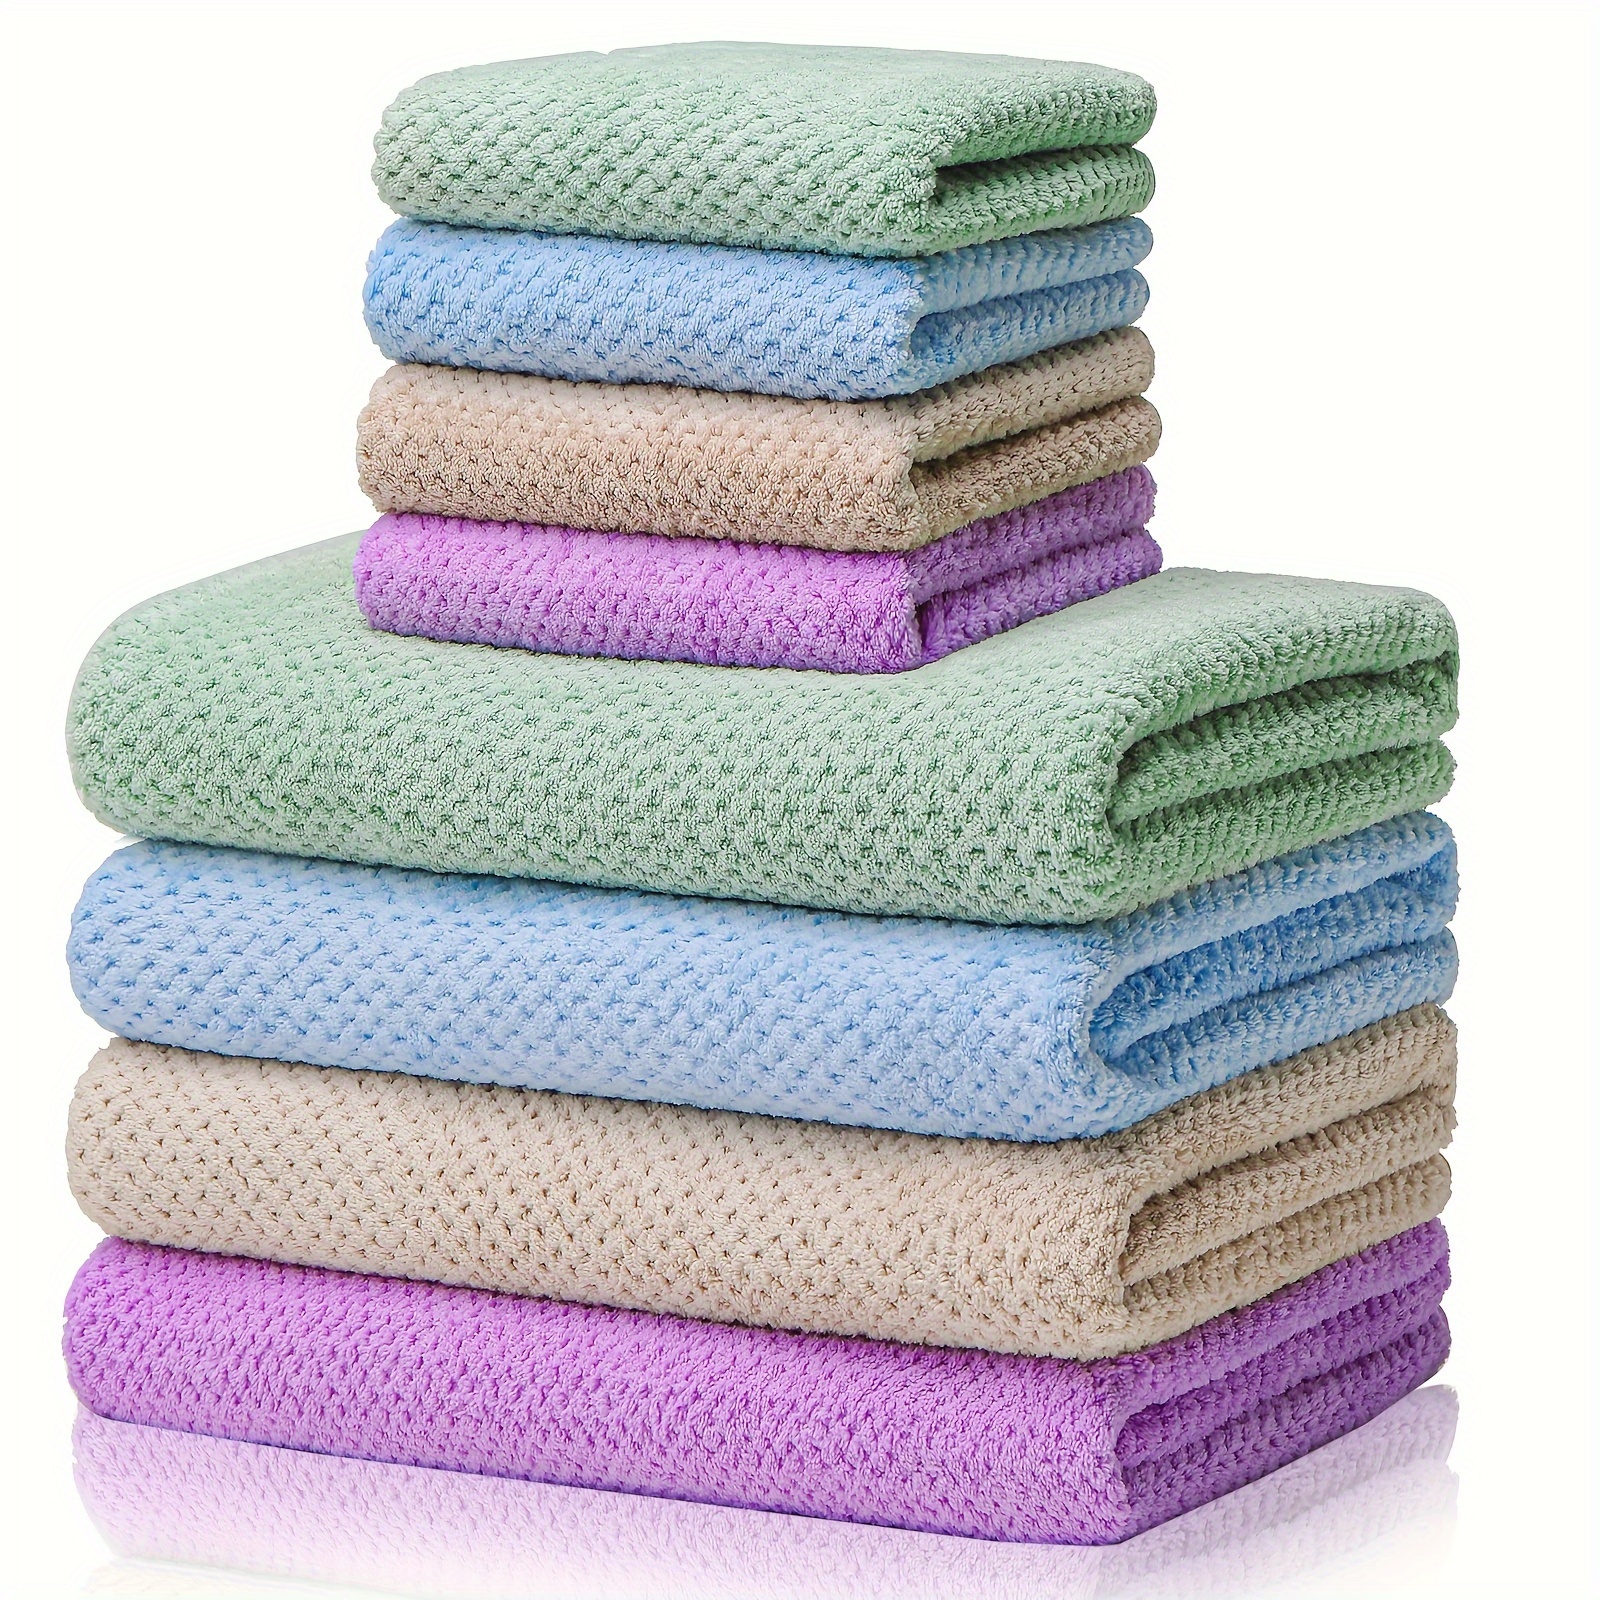 

Microfiber Bath Towels 4 Colors For Shower Pool Beach Bathroom Super Absorbent Soft Quick Dry Lightweight, Plush 4 Bath Towels And 4 Hand Towels